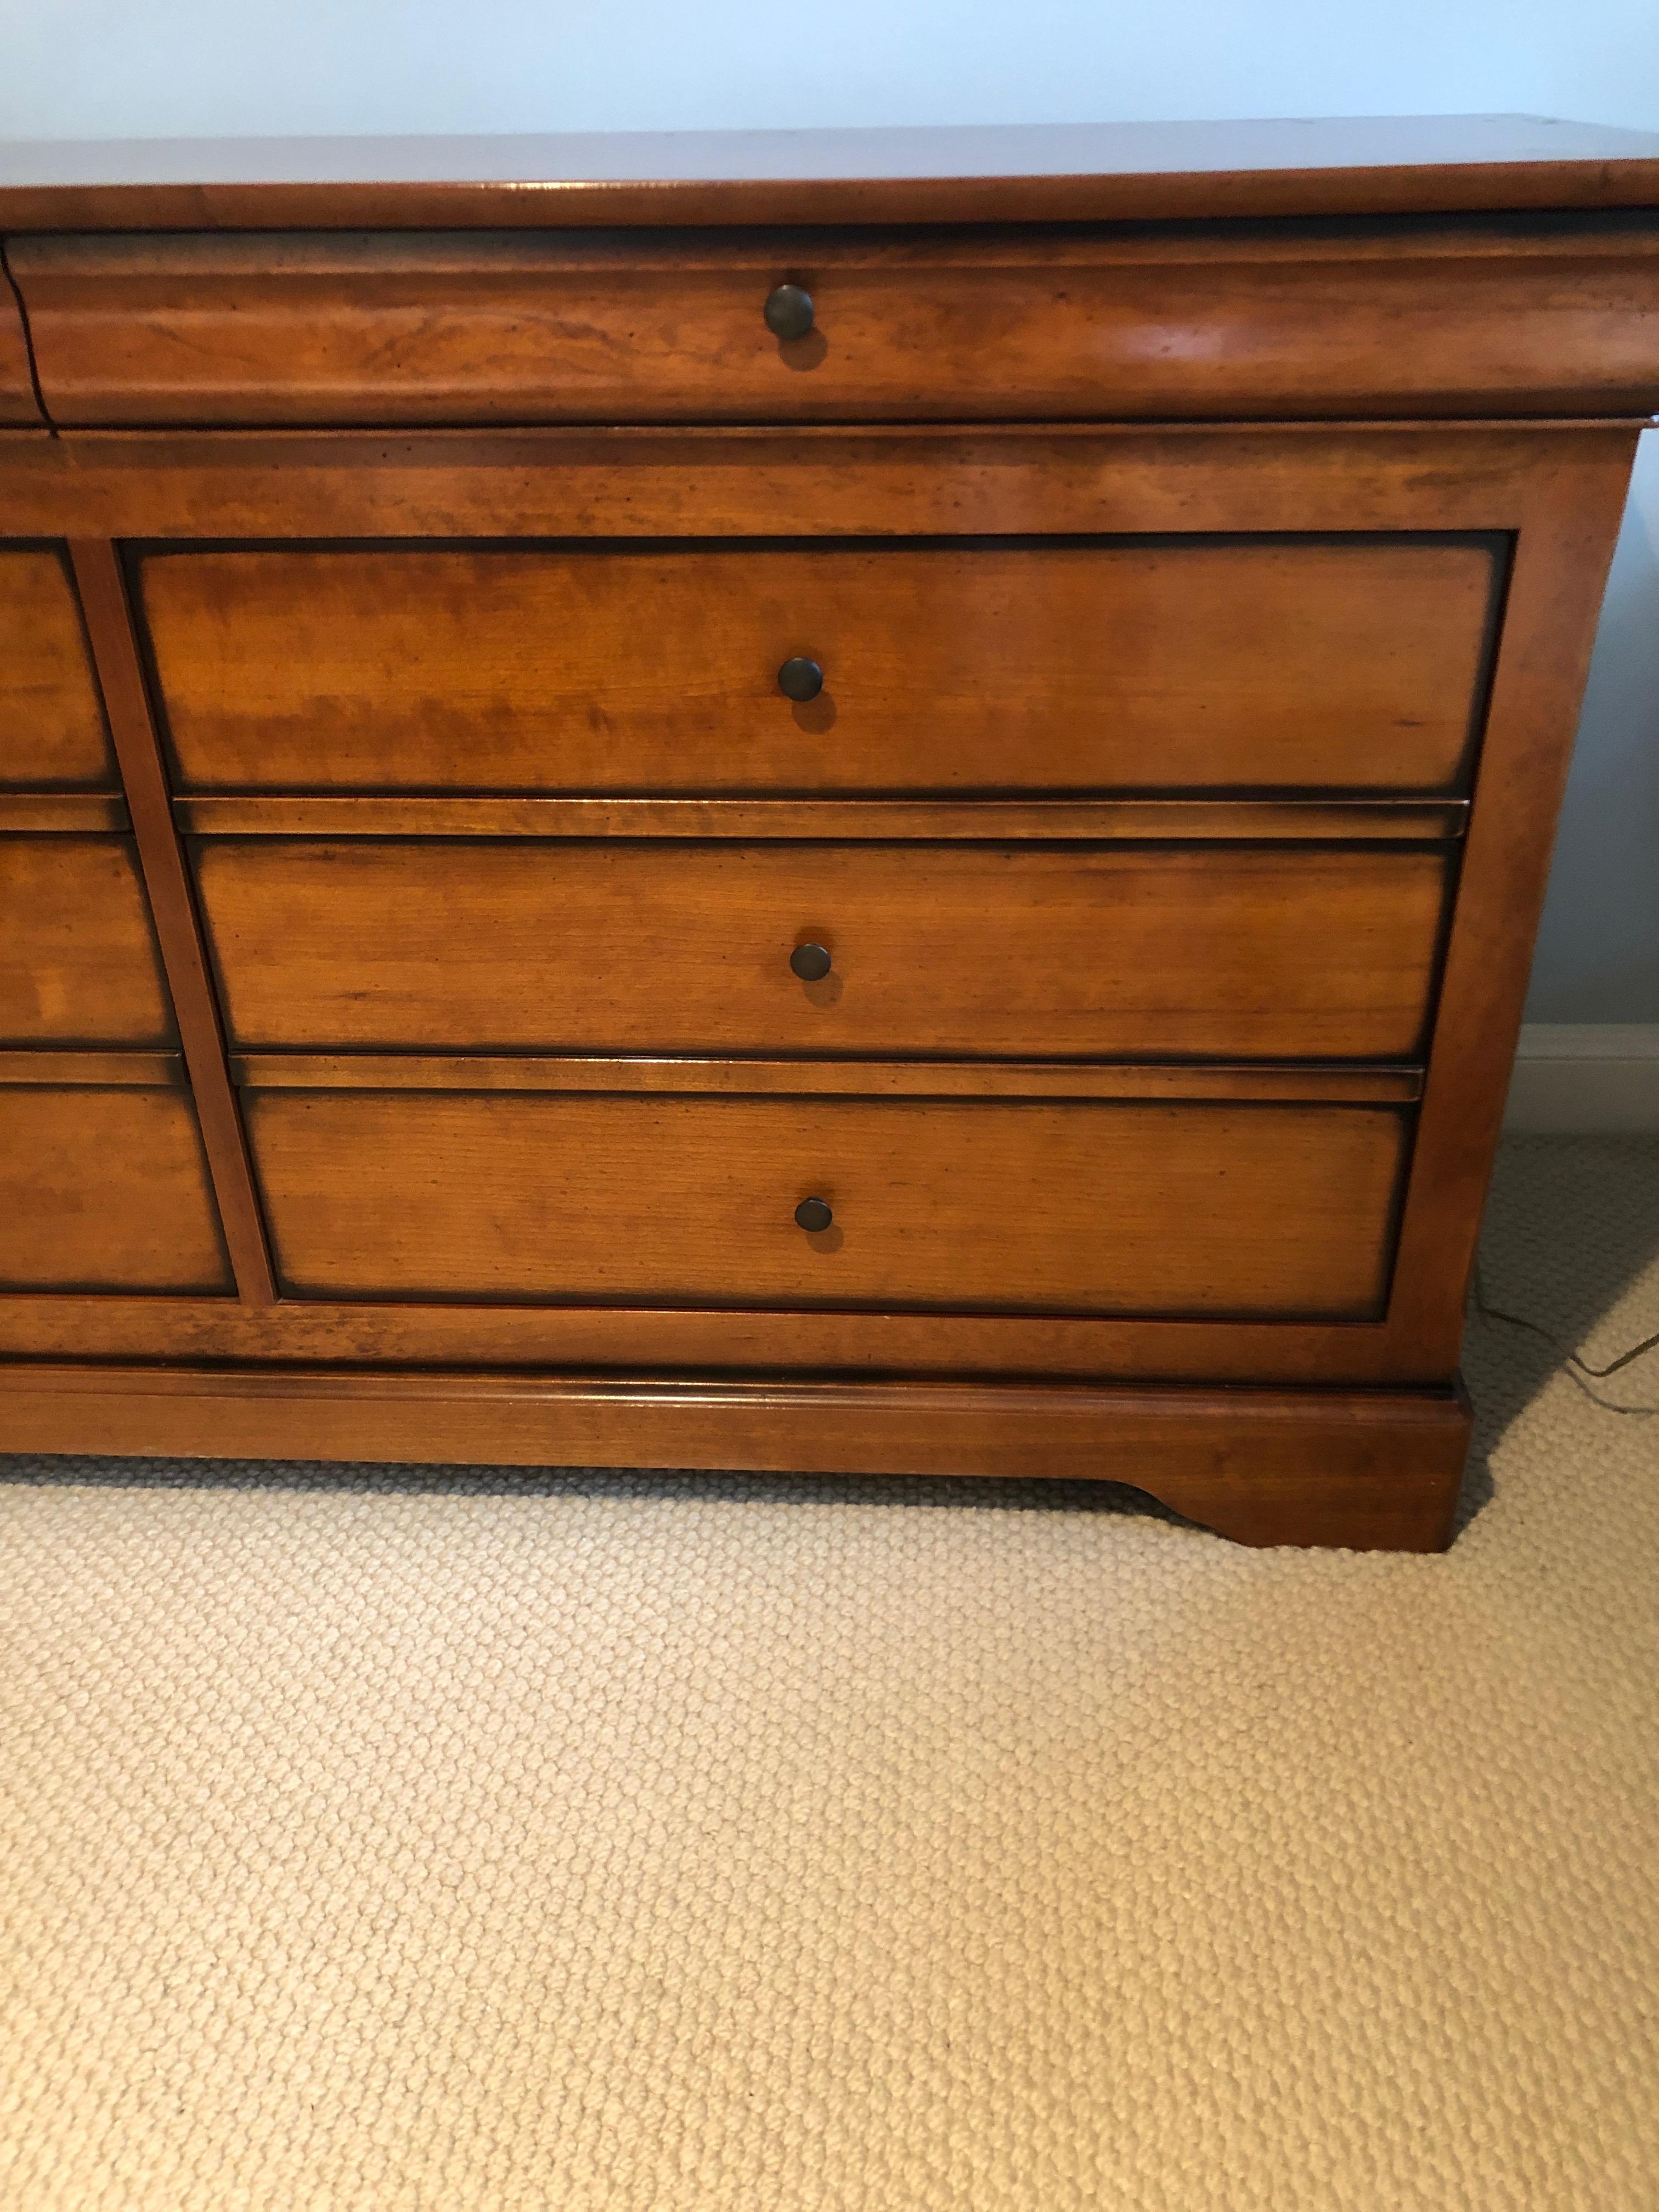 Beautifully made grange cherry dresser having two narrow drawers at the top with 6 roomy smoothly functioning drawers beneath. Made in France stamp and label on back.